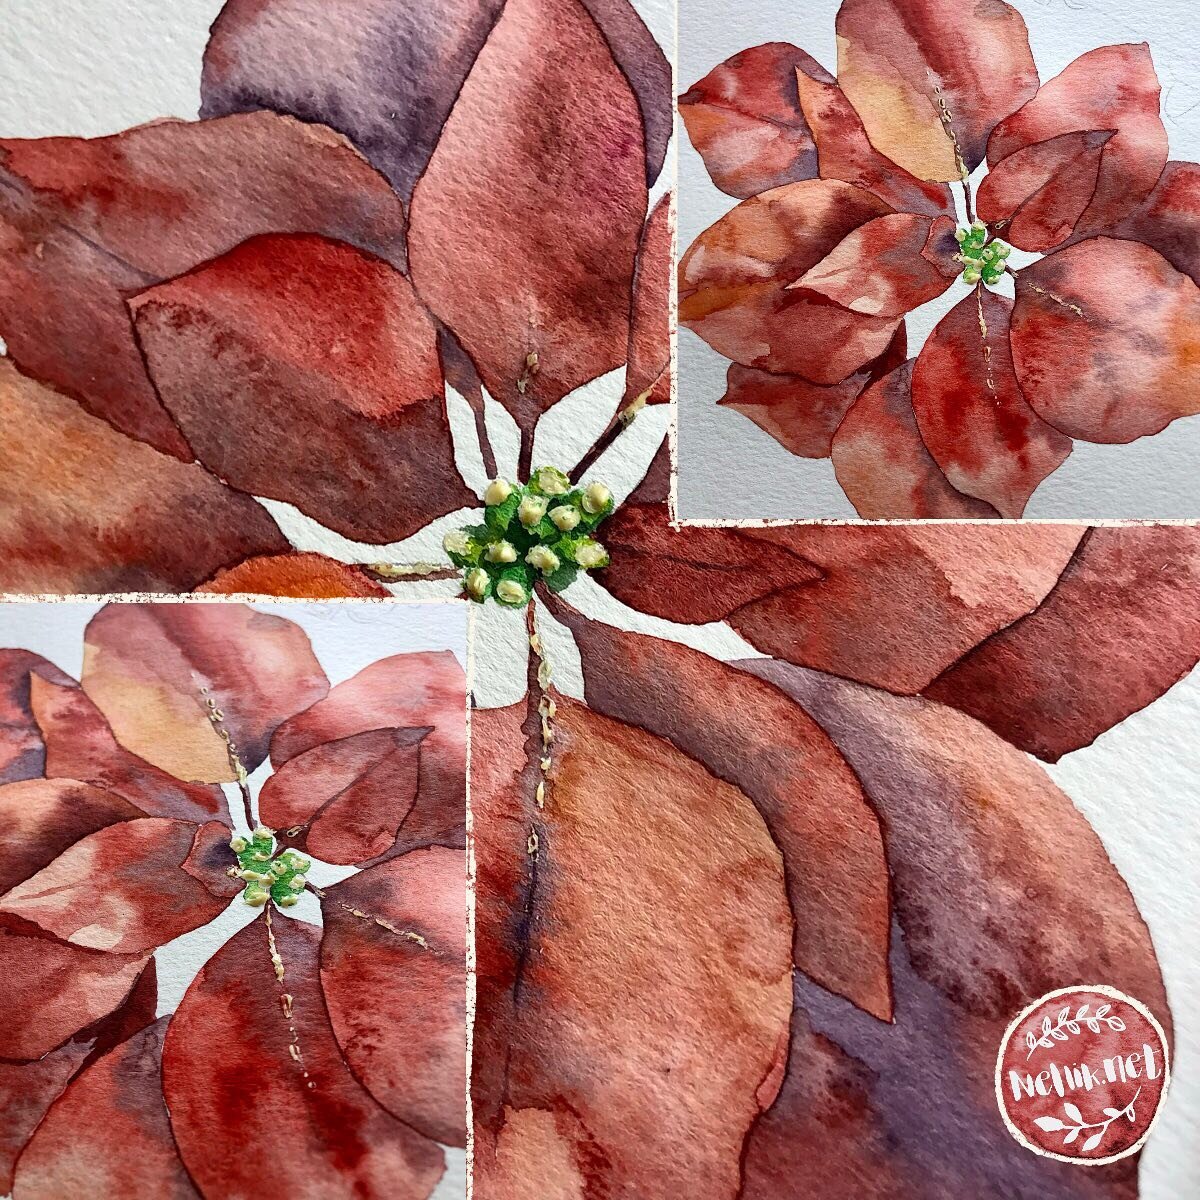 The process of developing floral design. 🌺
.
.
.
.
#paintedflowers
#paintanyway
#dailypainting 
#Nellik
#artlicensing
#ArtLicensingShow
#artforlicensing
#surfacedesign
#ArtLicensing
#artforproducts
#artistsofinstagram
#watercolor
#floralcard
#floral